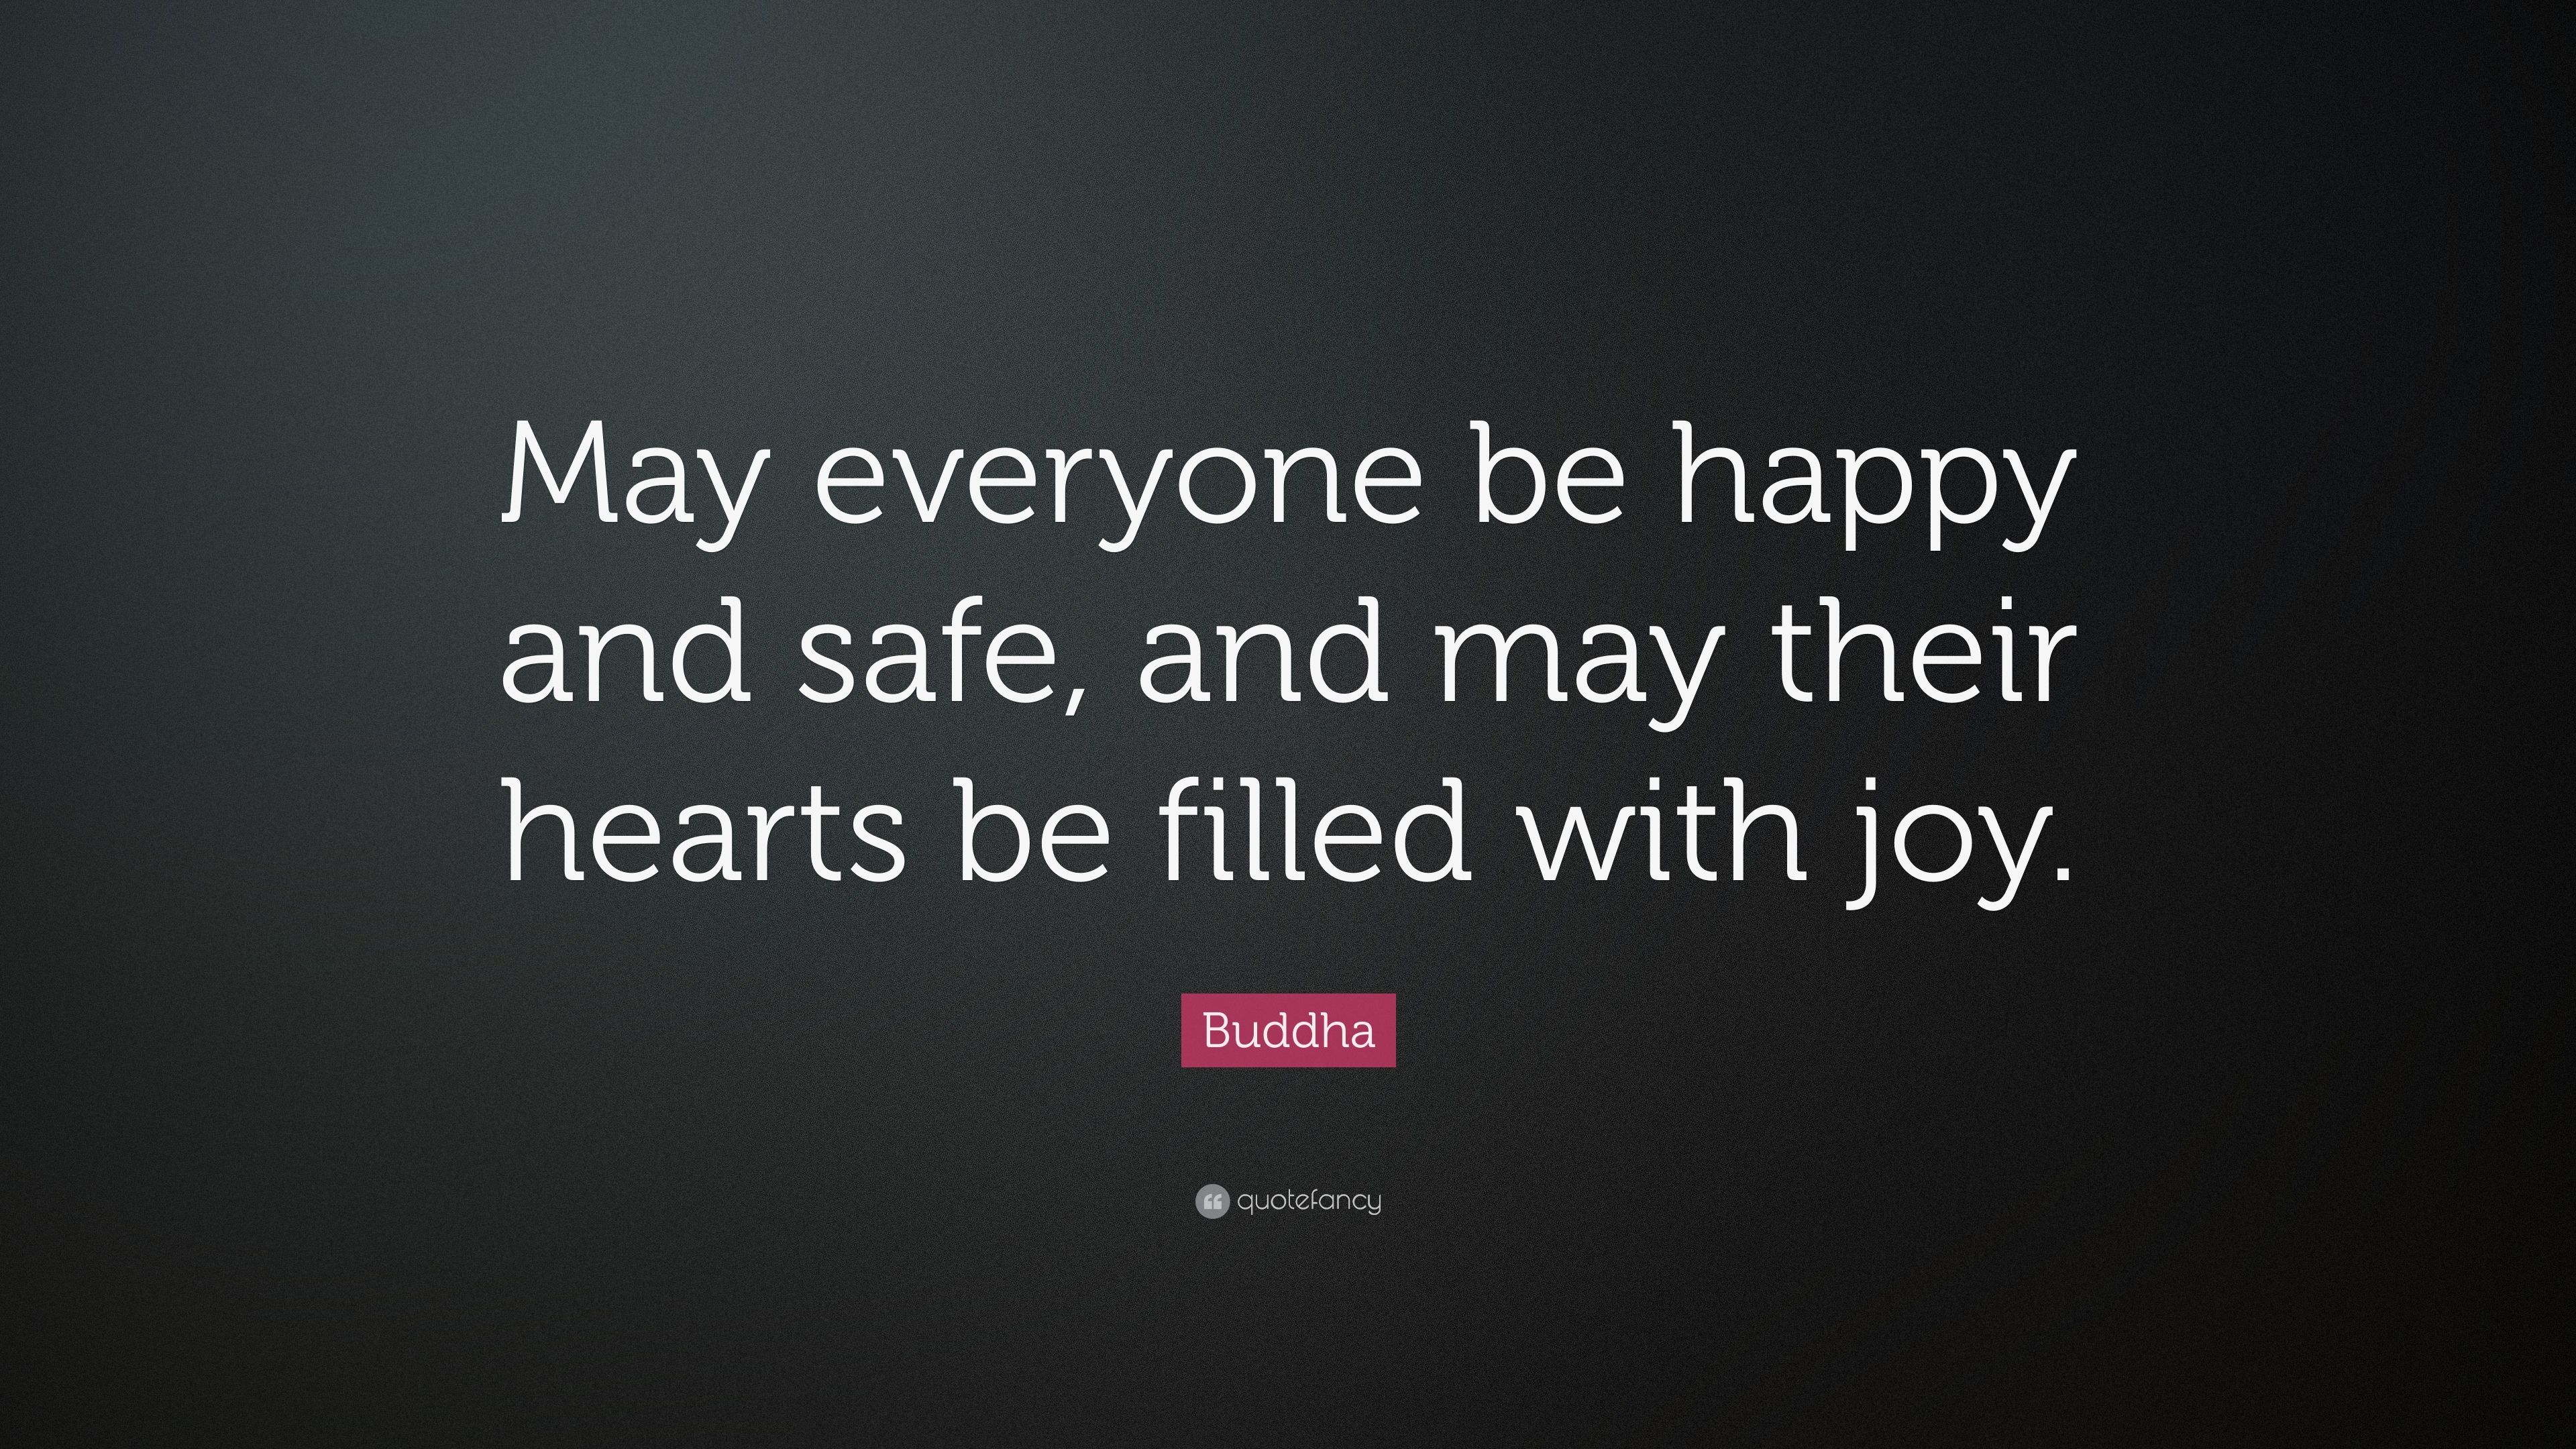 Buddha Quote: “May everyone be happy and safe, and may their